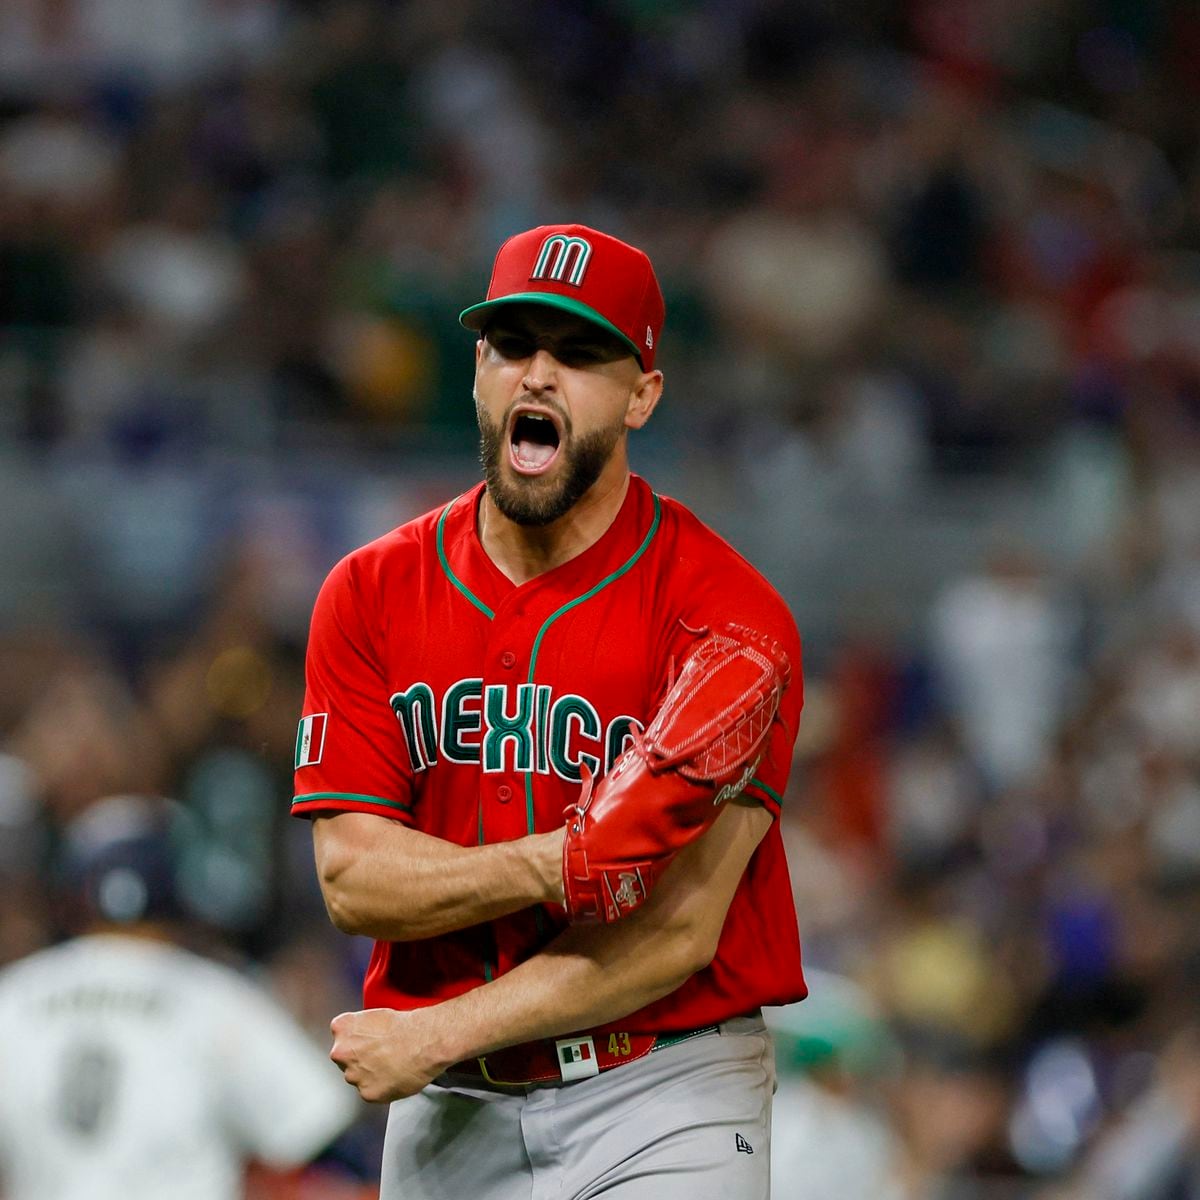 World Baseball Classic: Highlights from Japan, Netherlands and